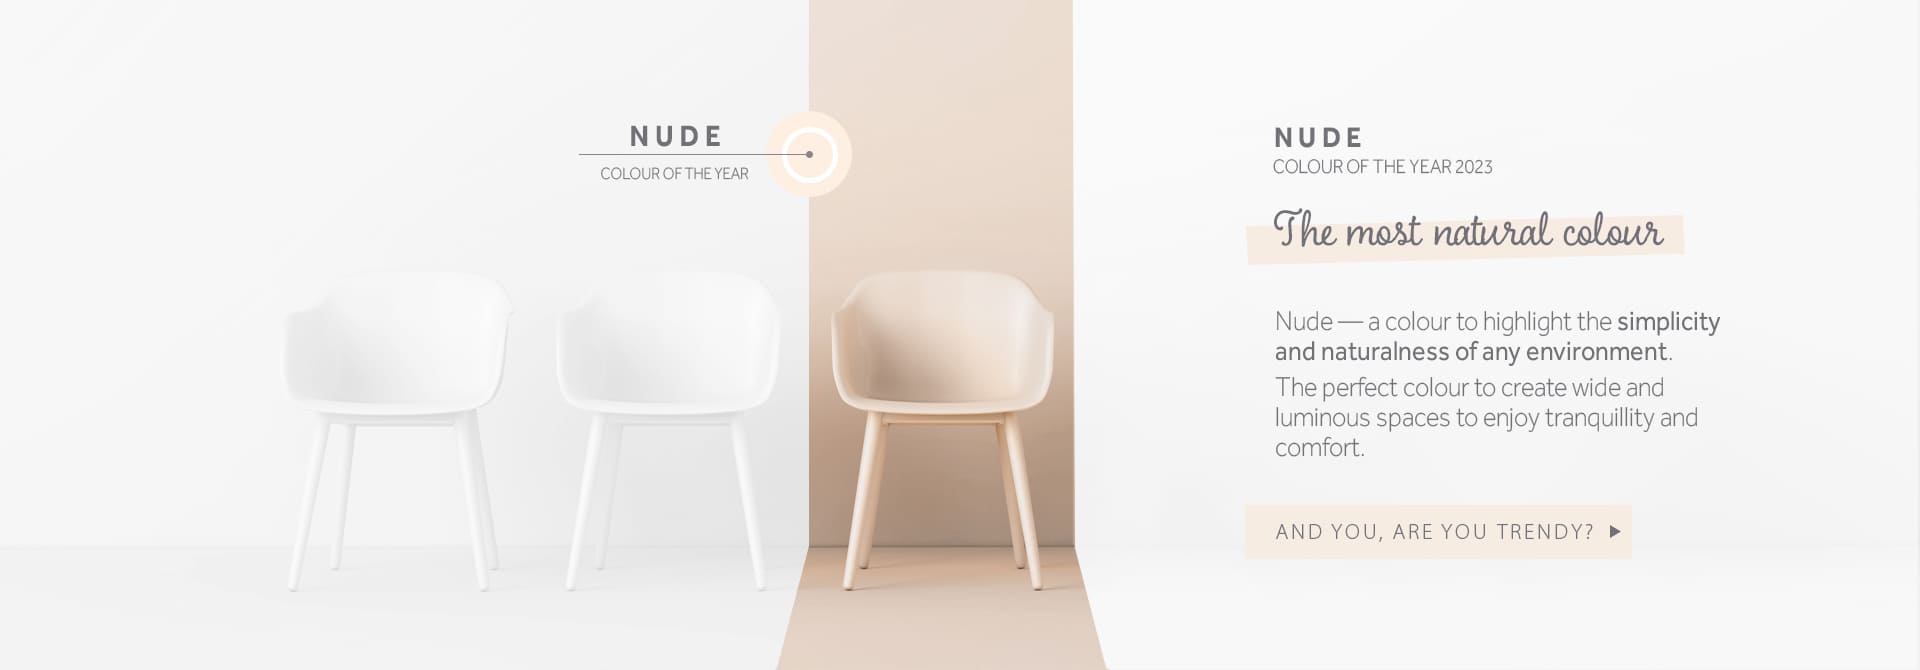 Nude, colour of the year 2023